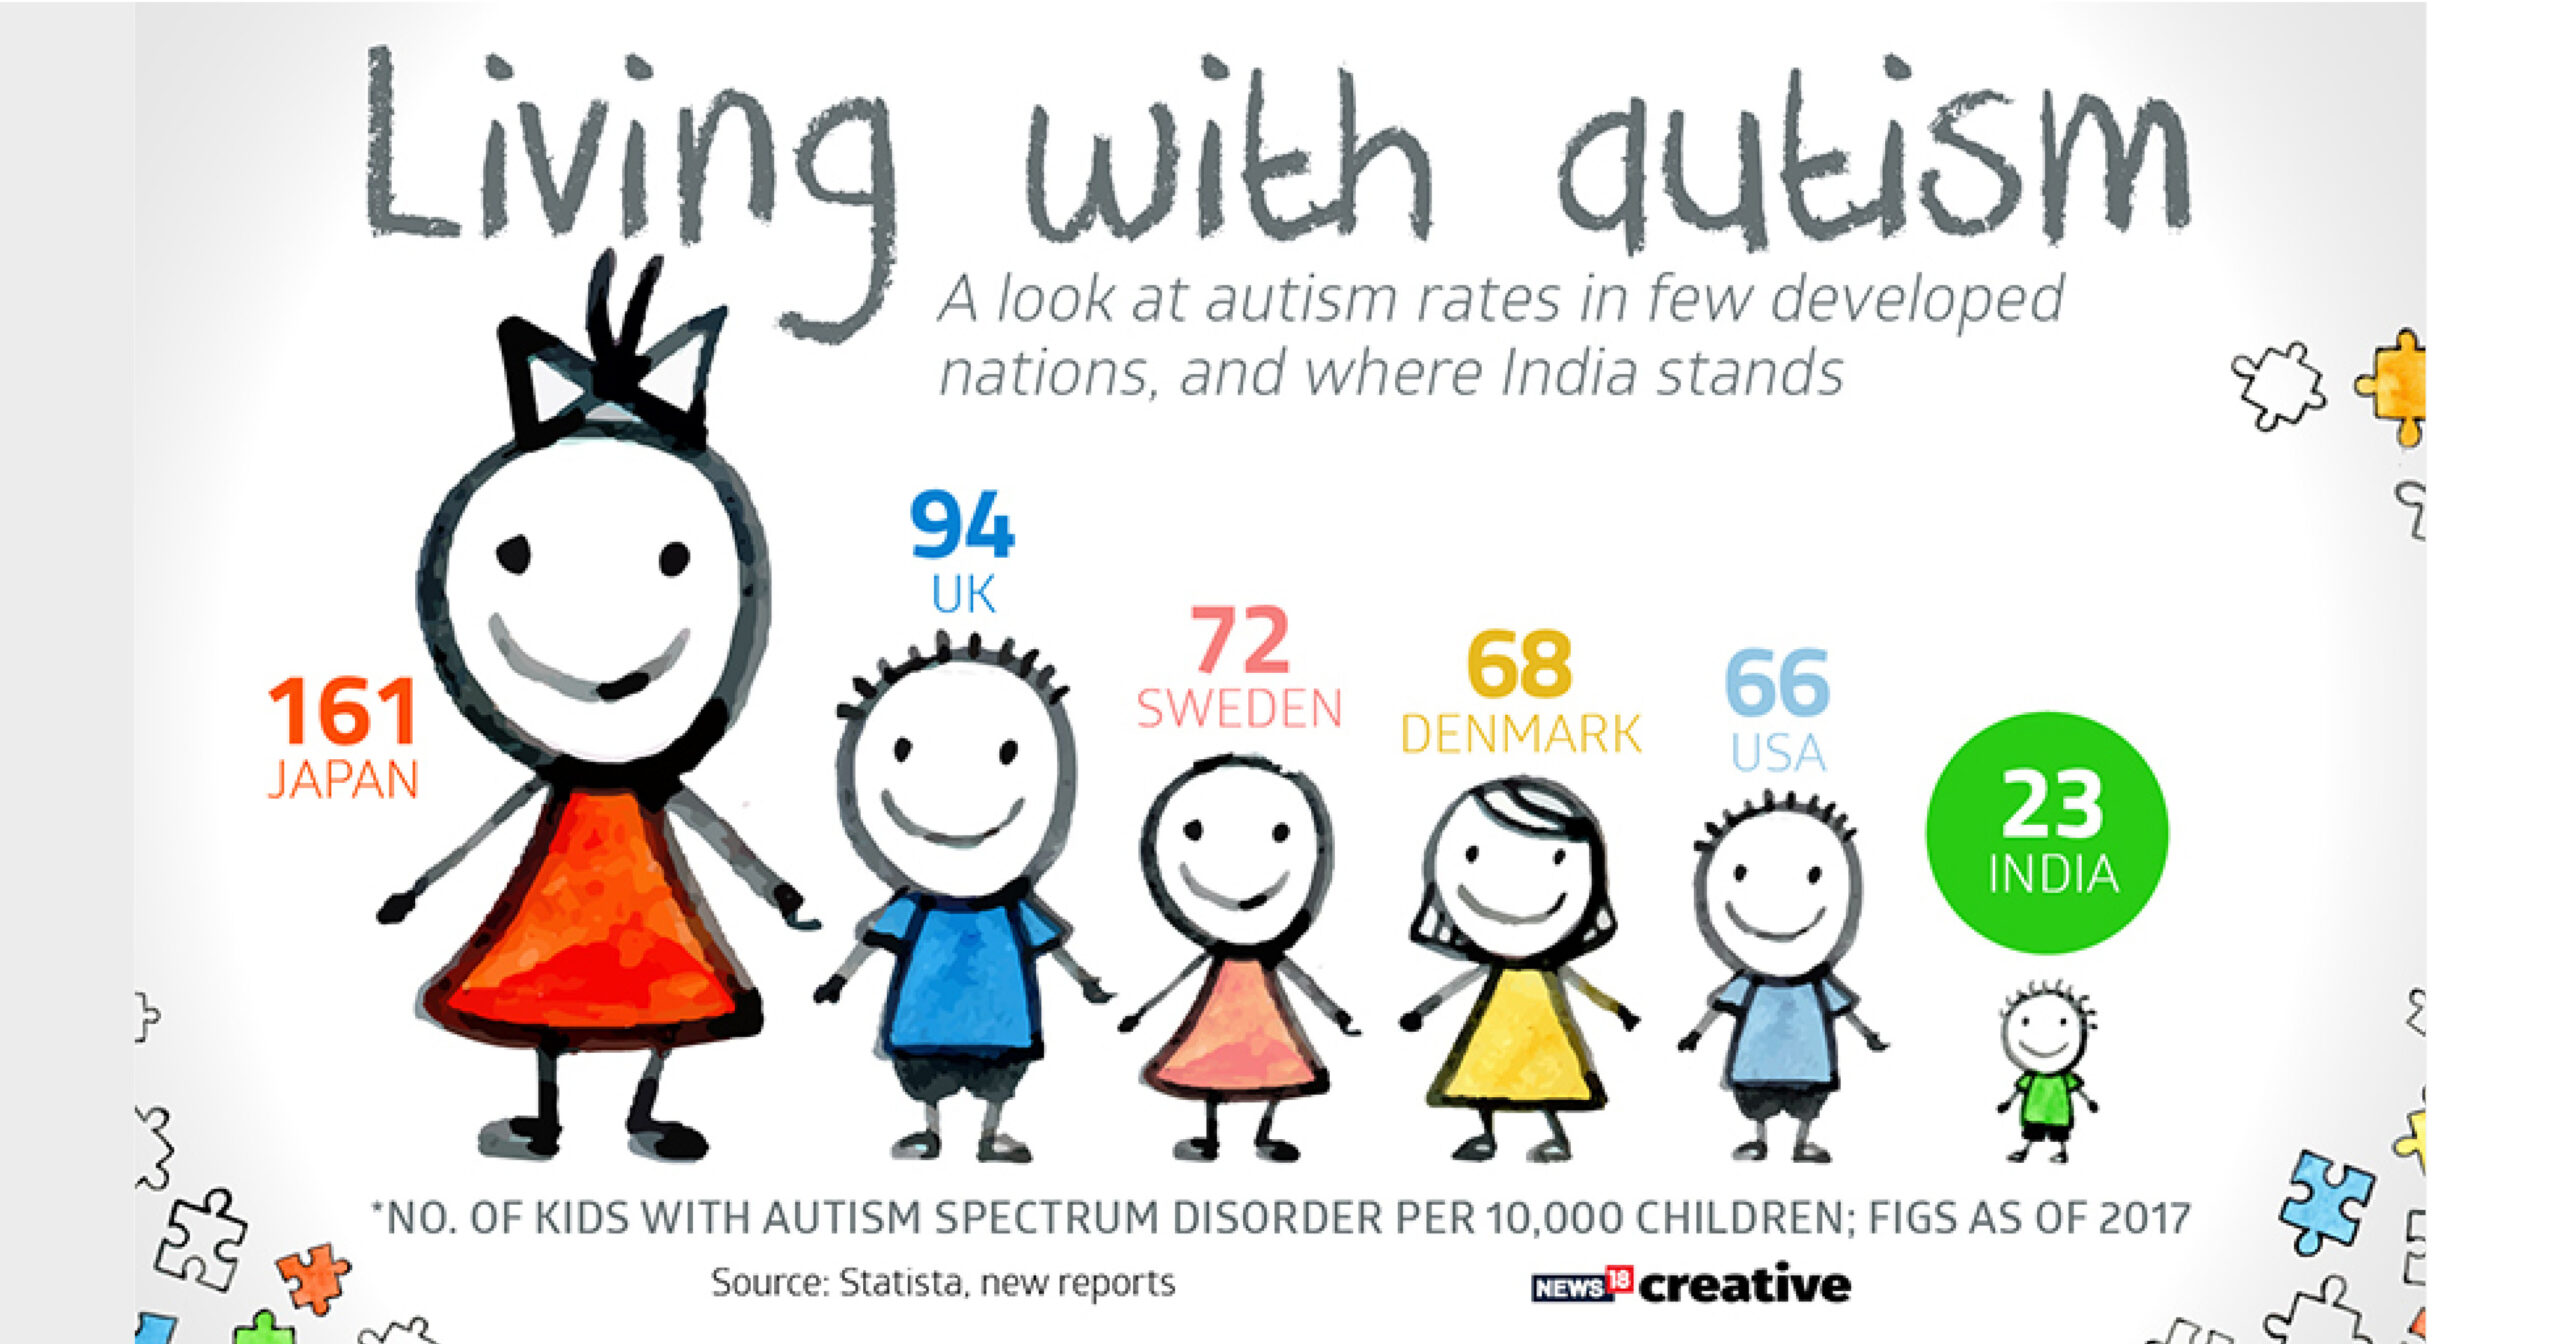 A look at autism rates in few developed nations, and where India stands. (Image: Network18 Creative)